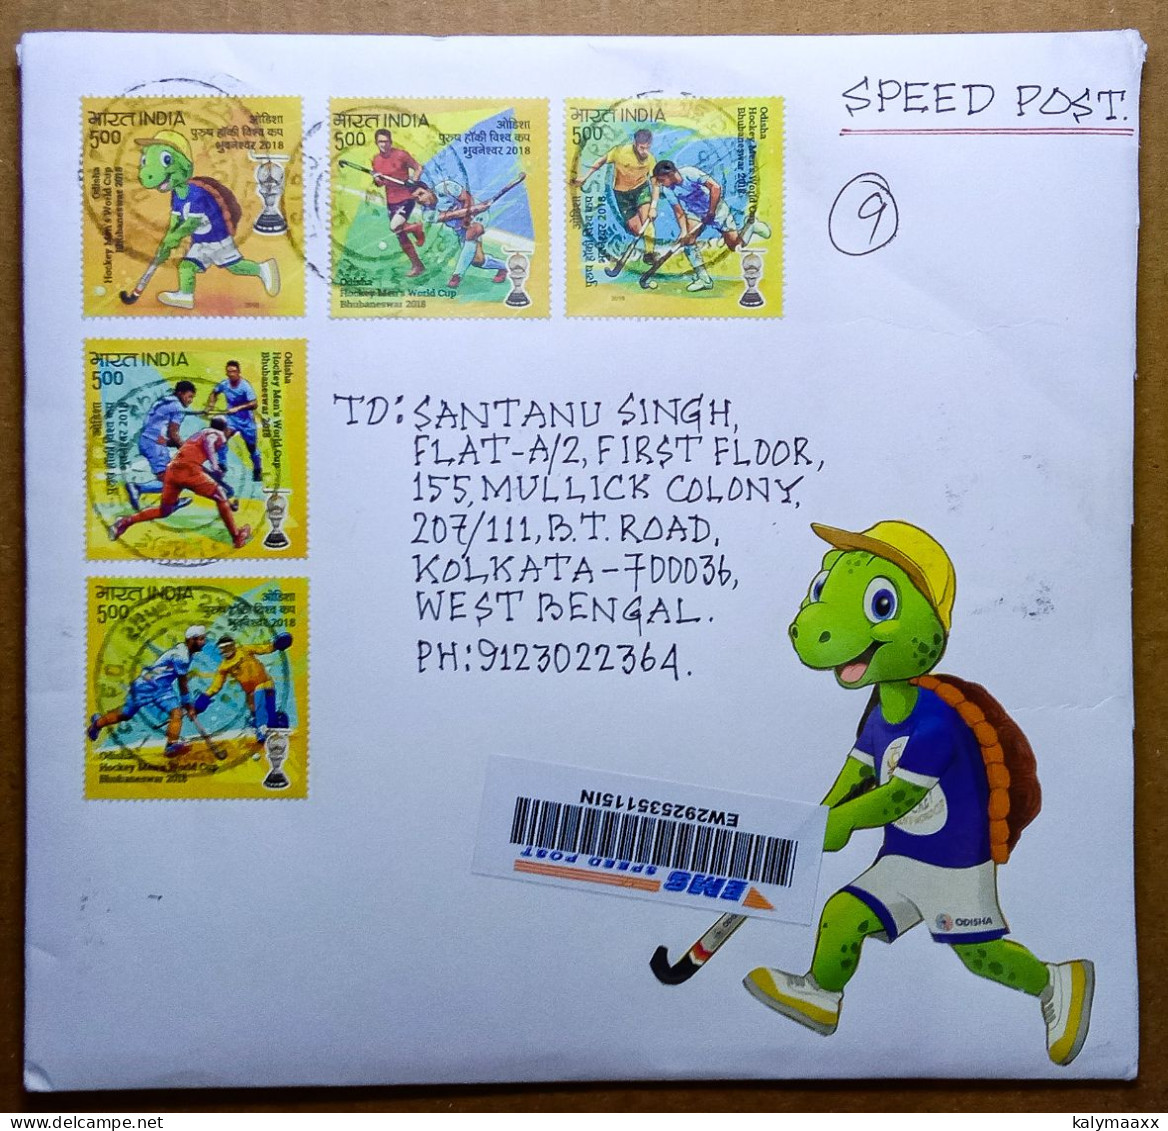 INDIA EMS SPEED POST COVER WITH HOCKEY STAMPS ATTACHED, HOCKEY, FIELD HOCKEY, COMMERCIALLY USED - Jockey (sobre Hierba)